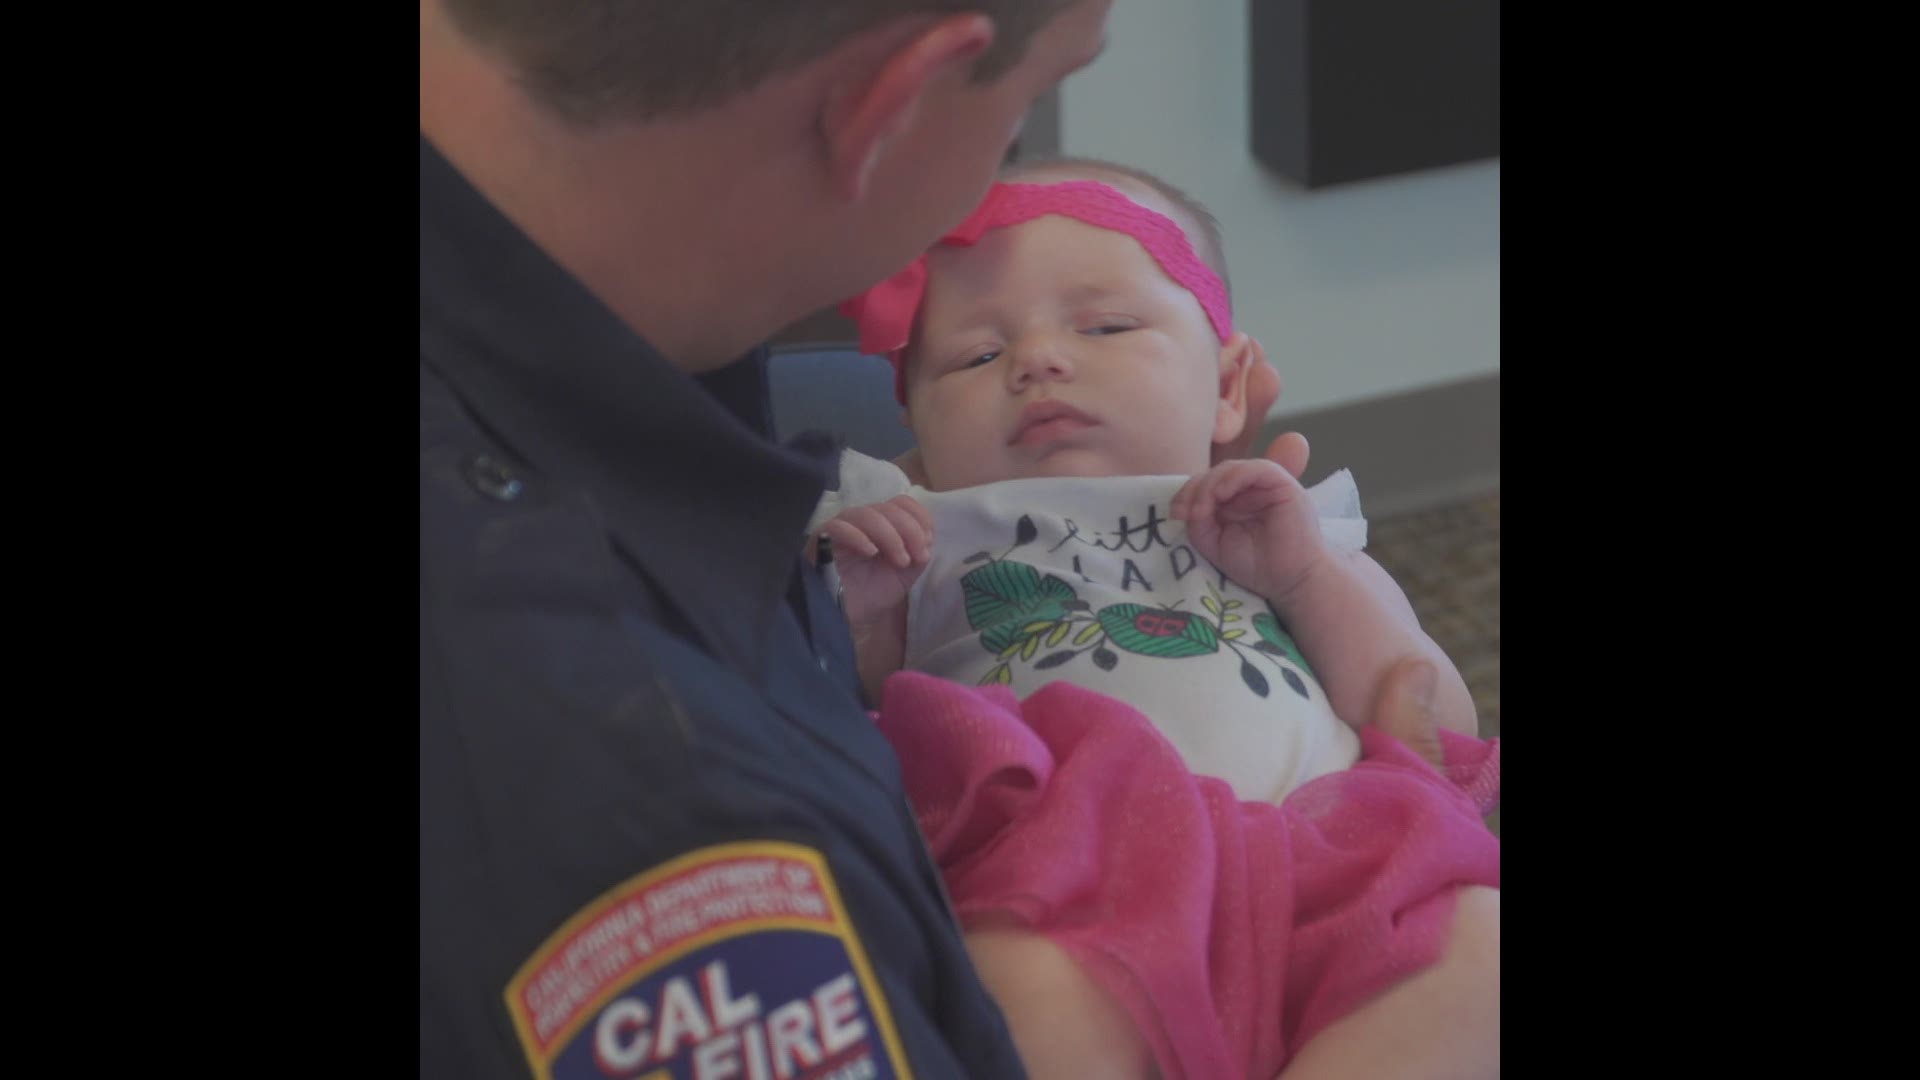 On the morning of May 13, 2-month-old Wren stopped breathing and her parents called for help. Cal Fire Dispatcher Chris Africa helped talk Wren's father, John, through the process of keeping the baby girl alive until an ambulance arrived. Months later, the family and the dispatcher reunited: